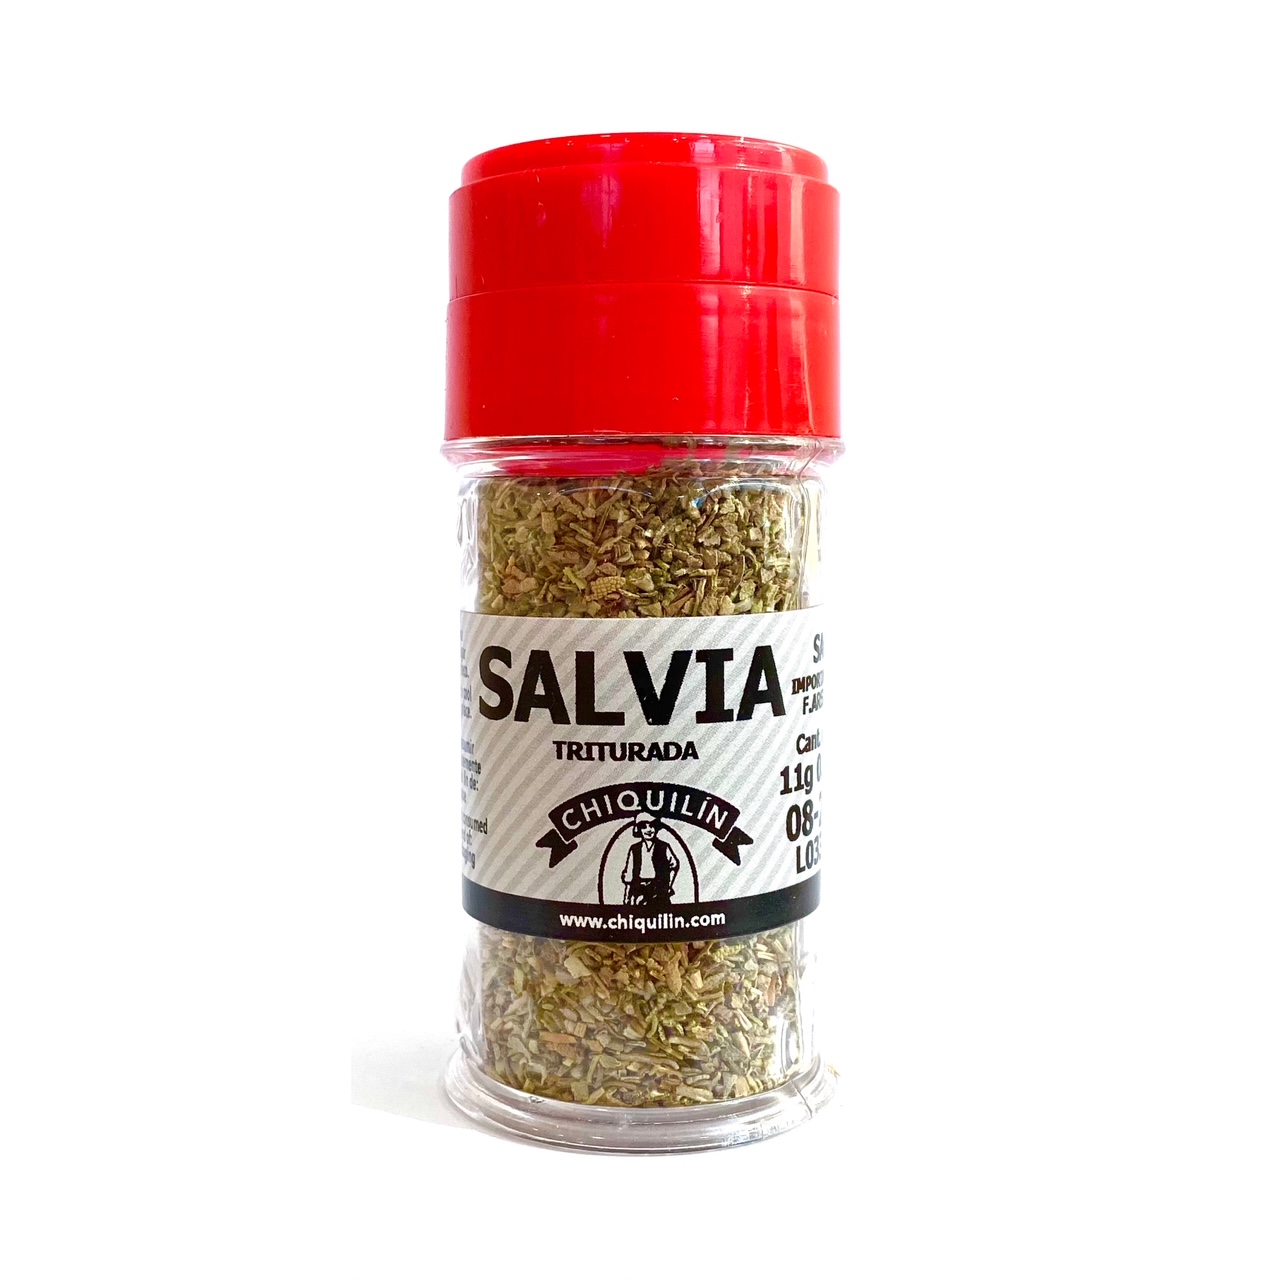 SALVIA 10X11gr CHIQUILIN